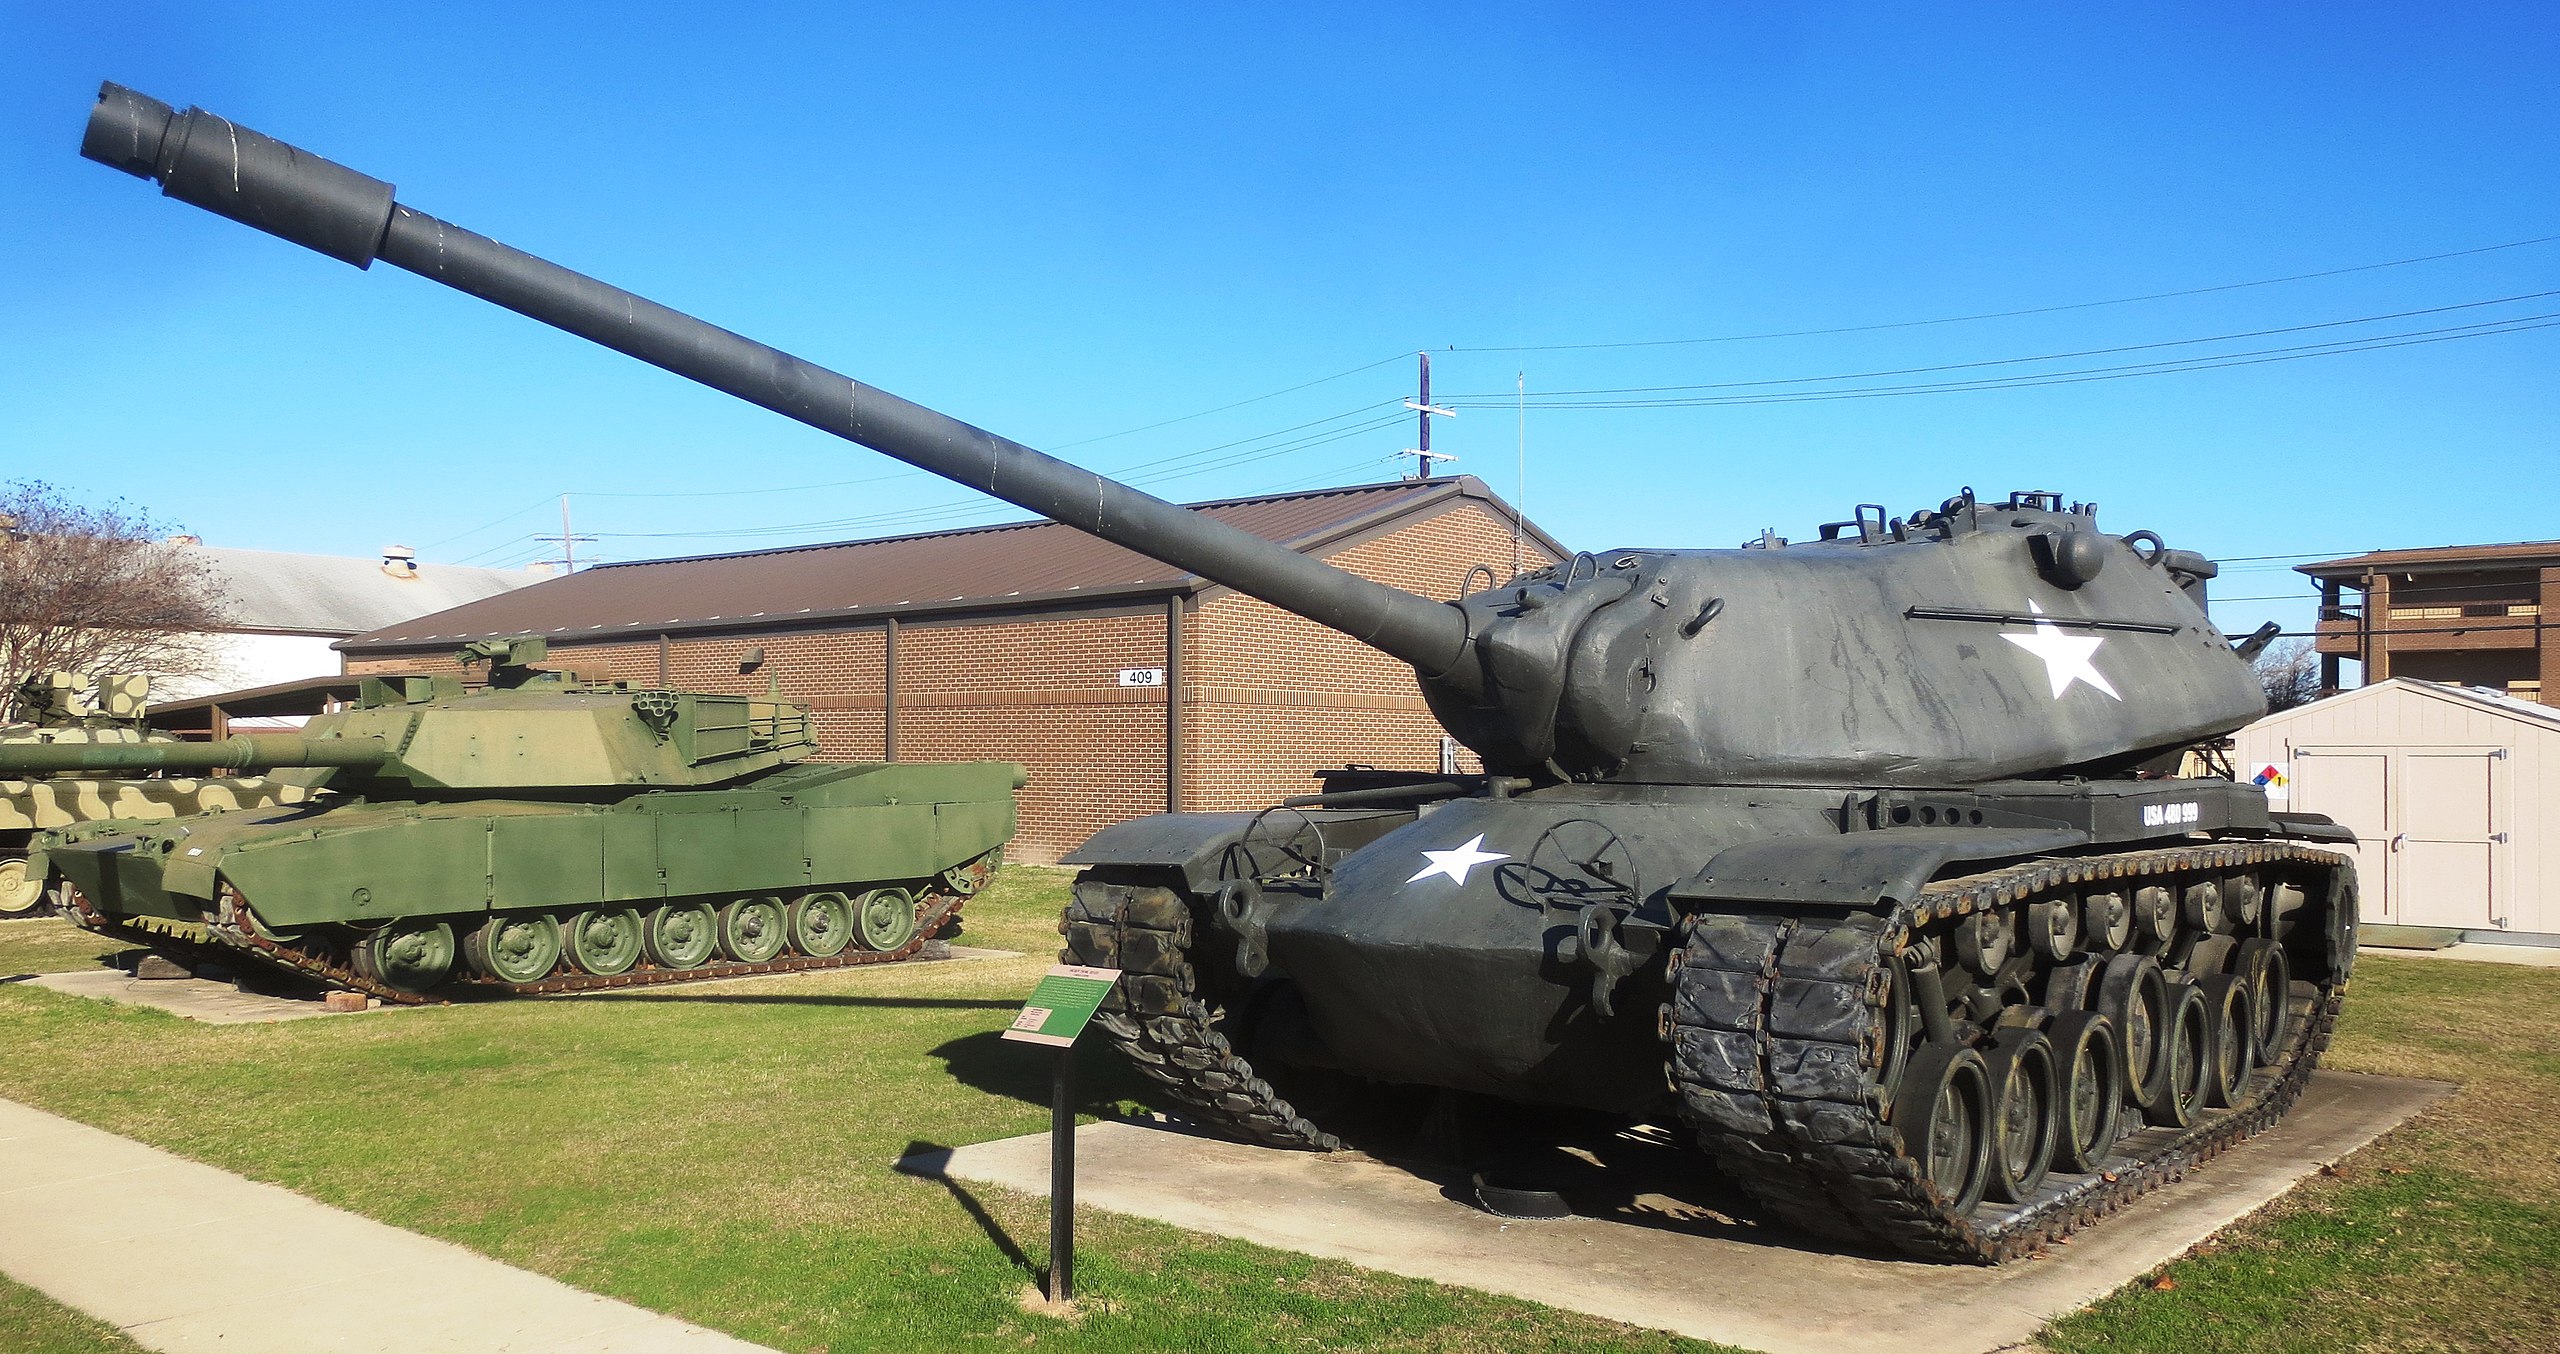 M103 at a museum.